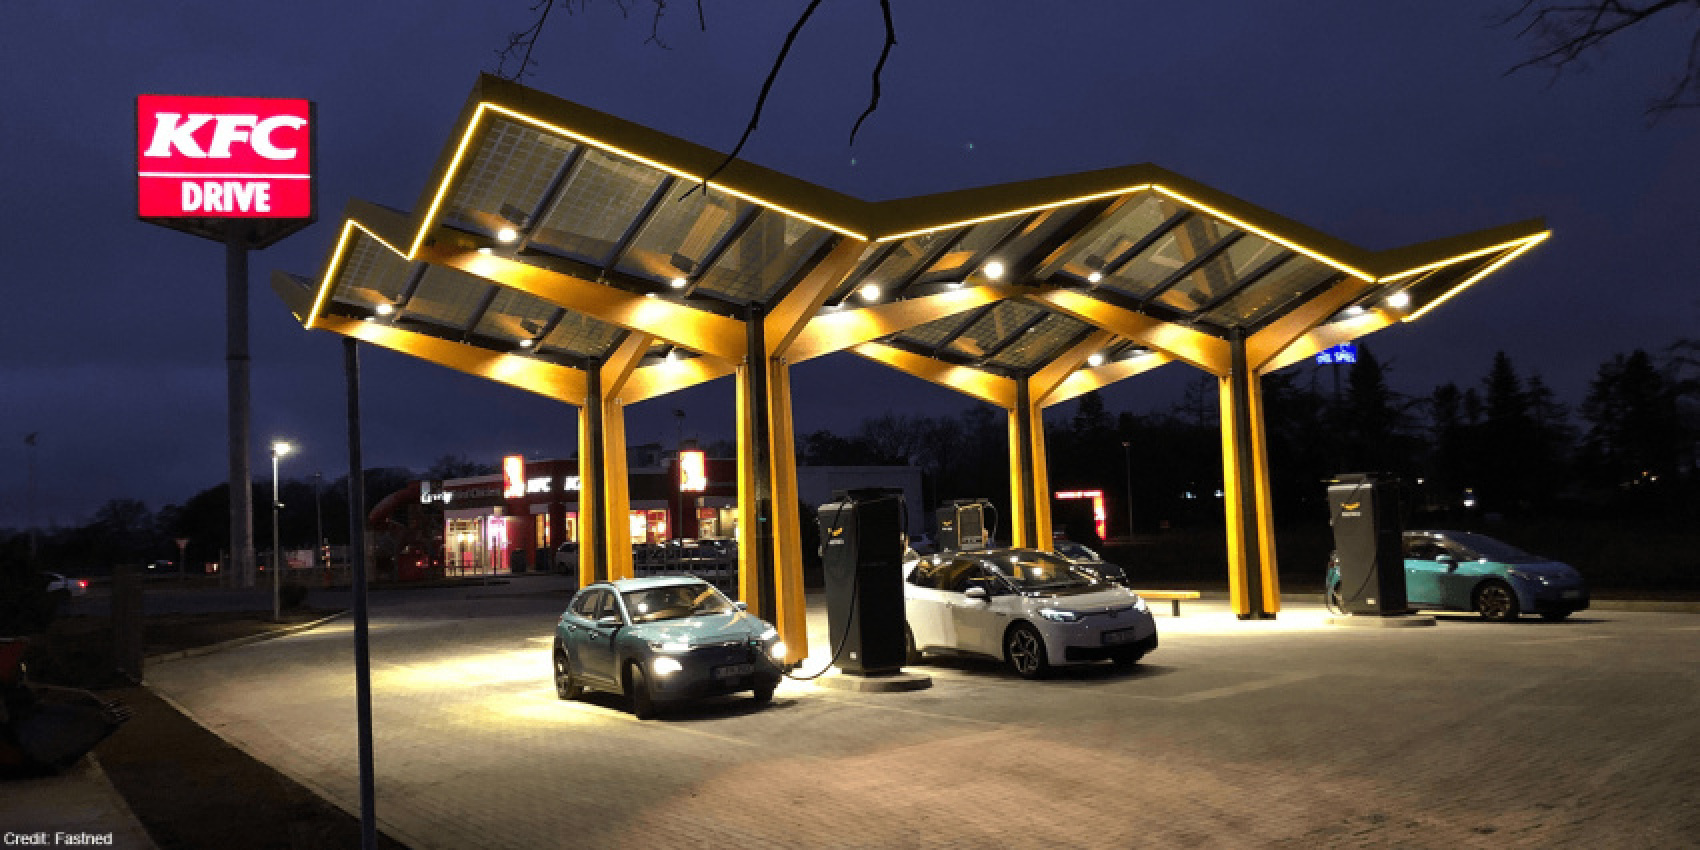 autos, cars, electric vehicle, energy & infrastructure, charging infrastructure, charging stations, data, europe, fastned, roaming, fastned marks over a million charging sessions in 2021